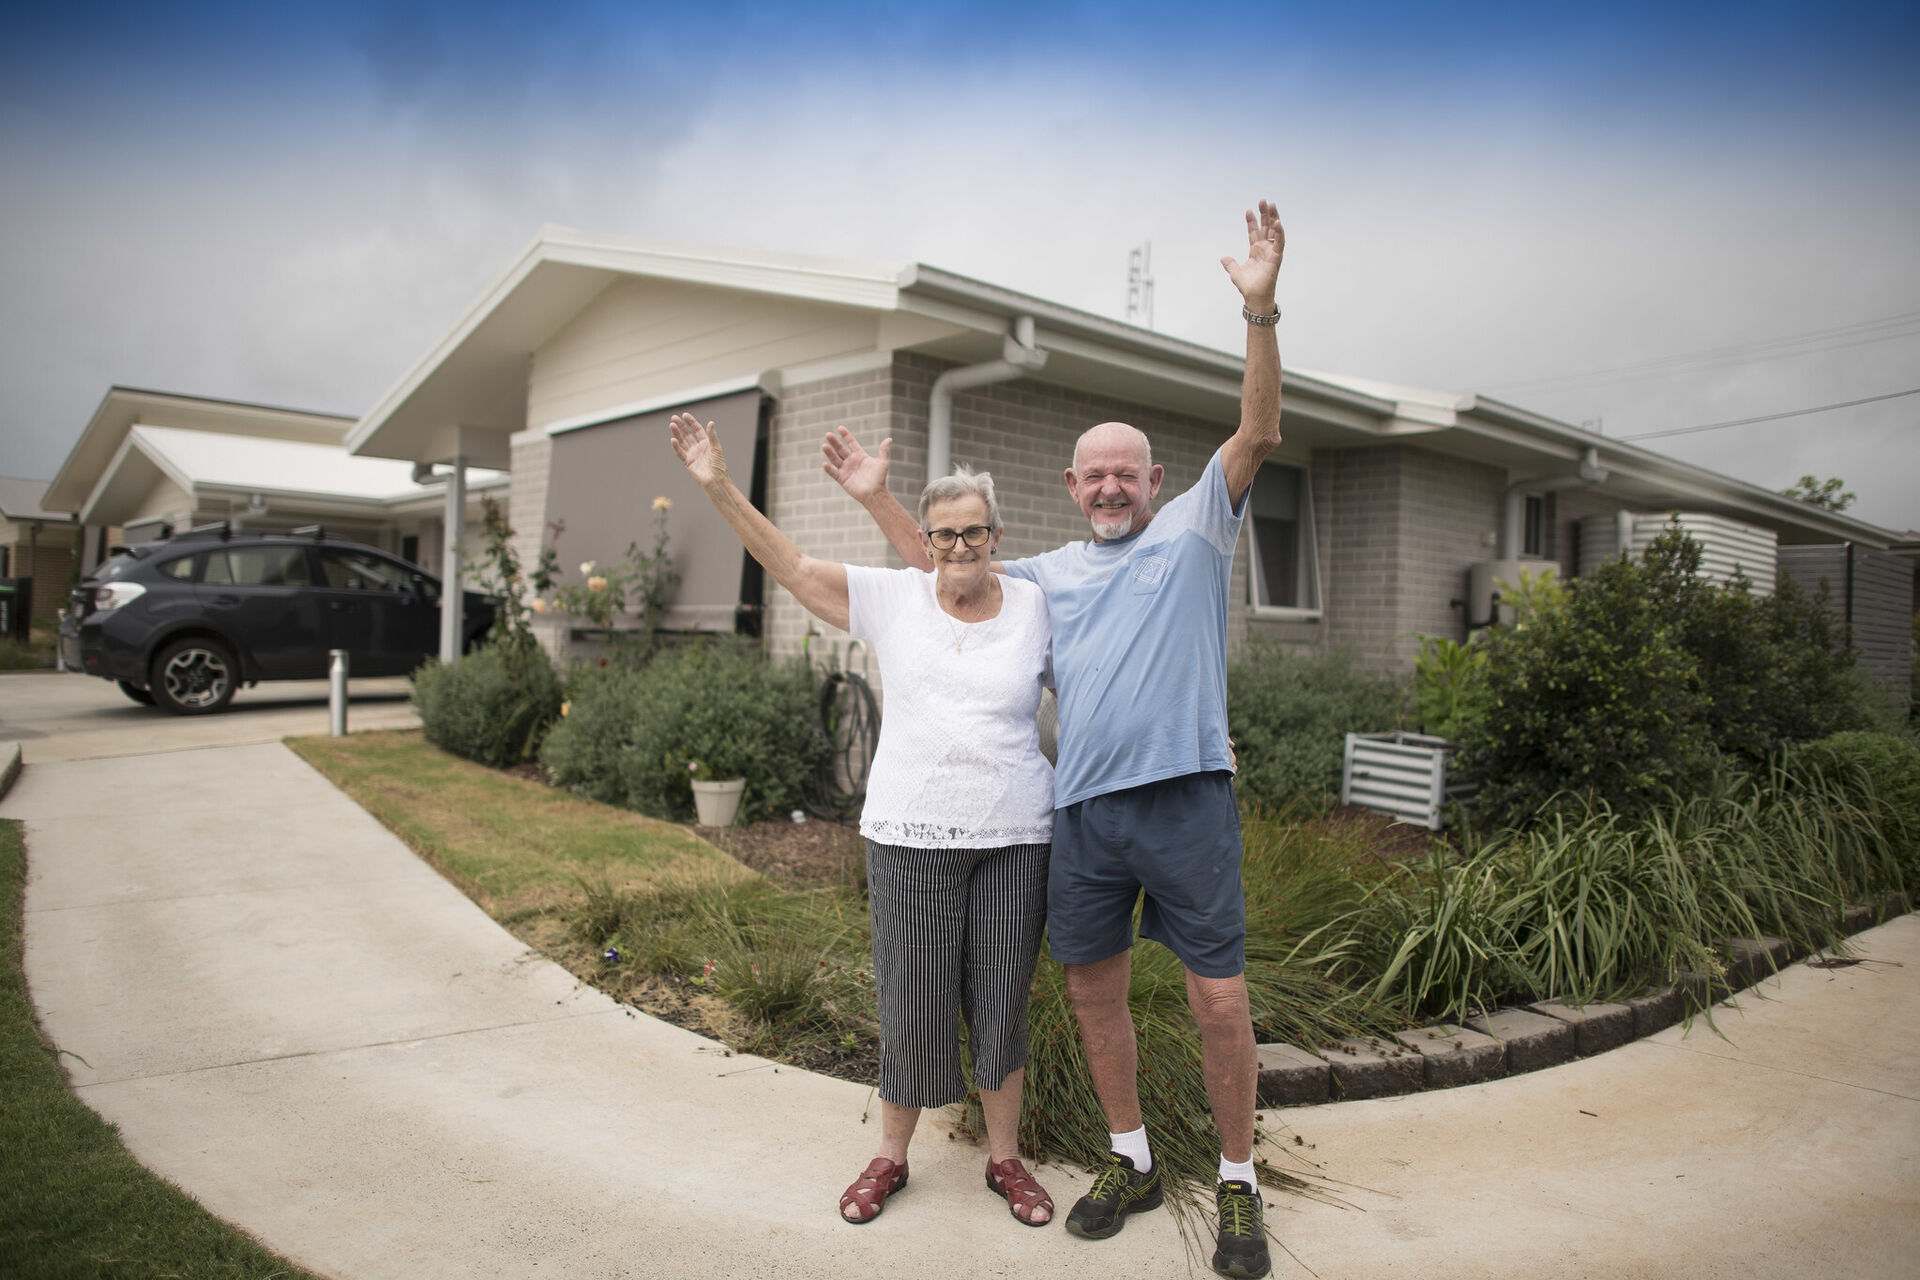 over 55s retirement village couple in the community enjoying retirement after downsizing to baptistcare maranoa village in alstonville